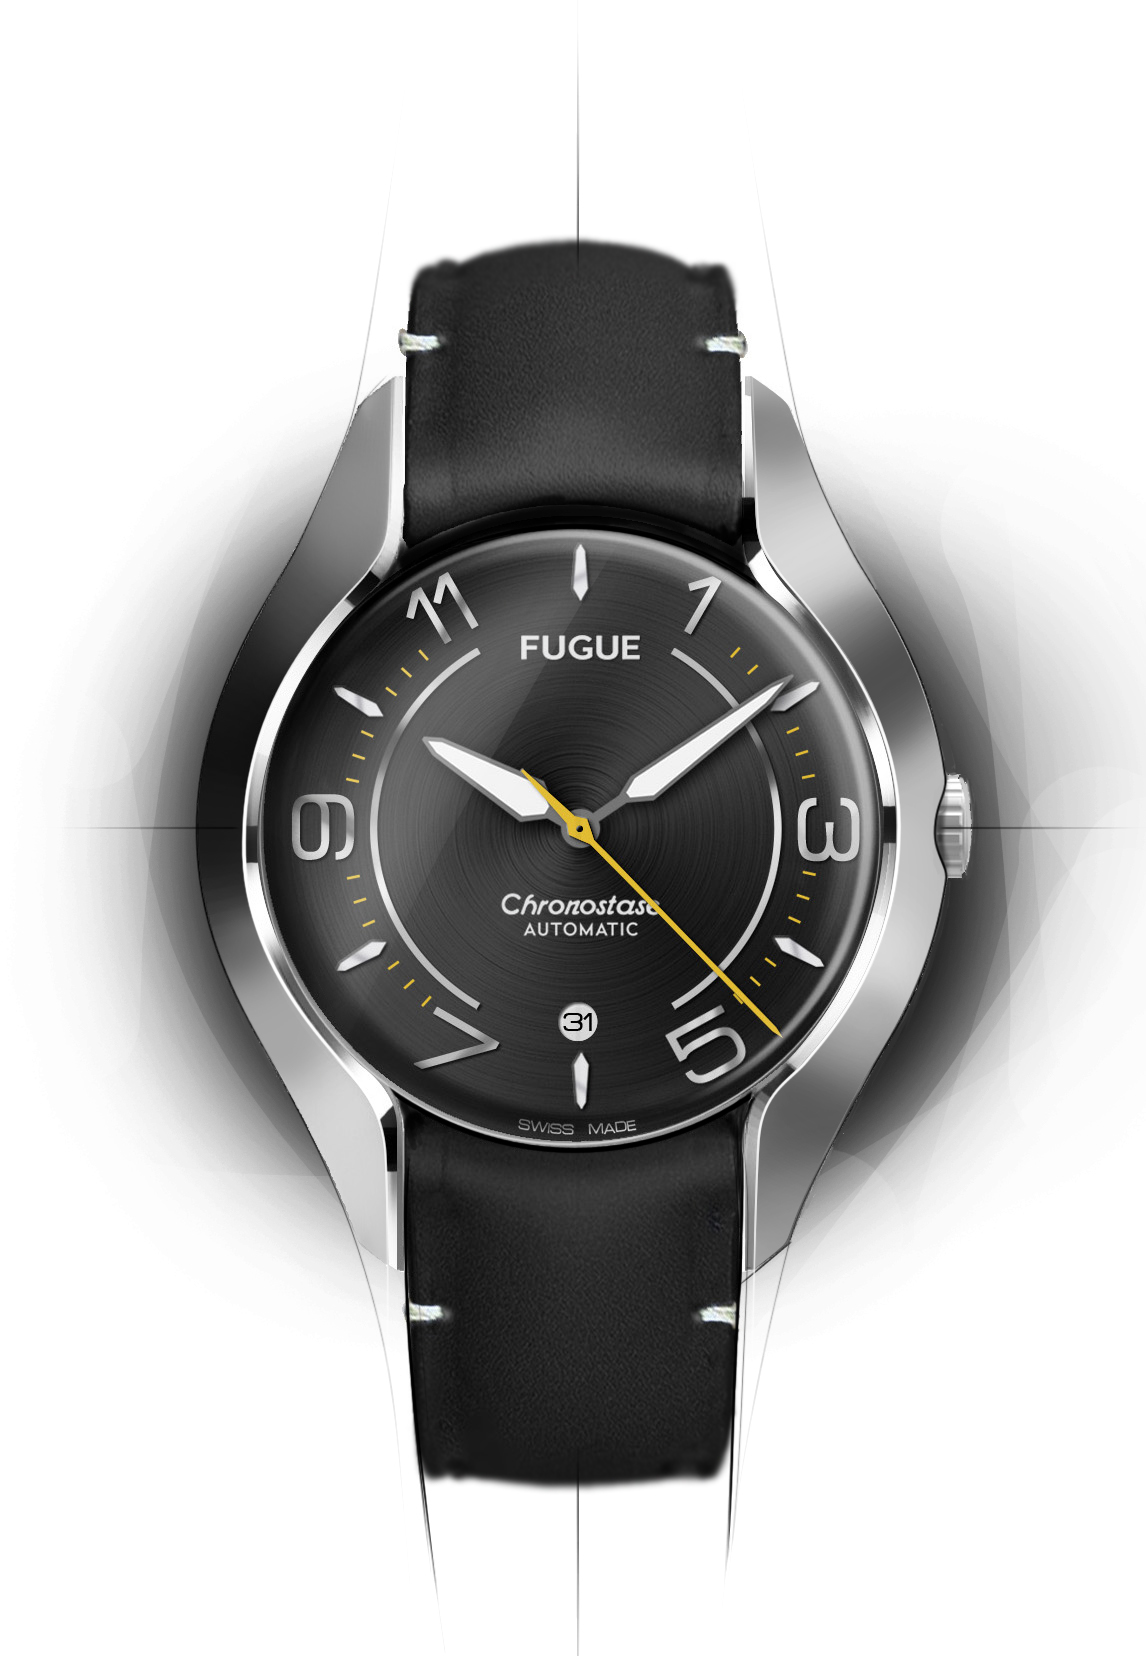 watch Watches fugue time wristwatch montres Freelance detais horology Style